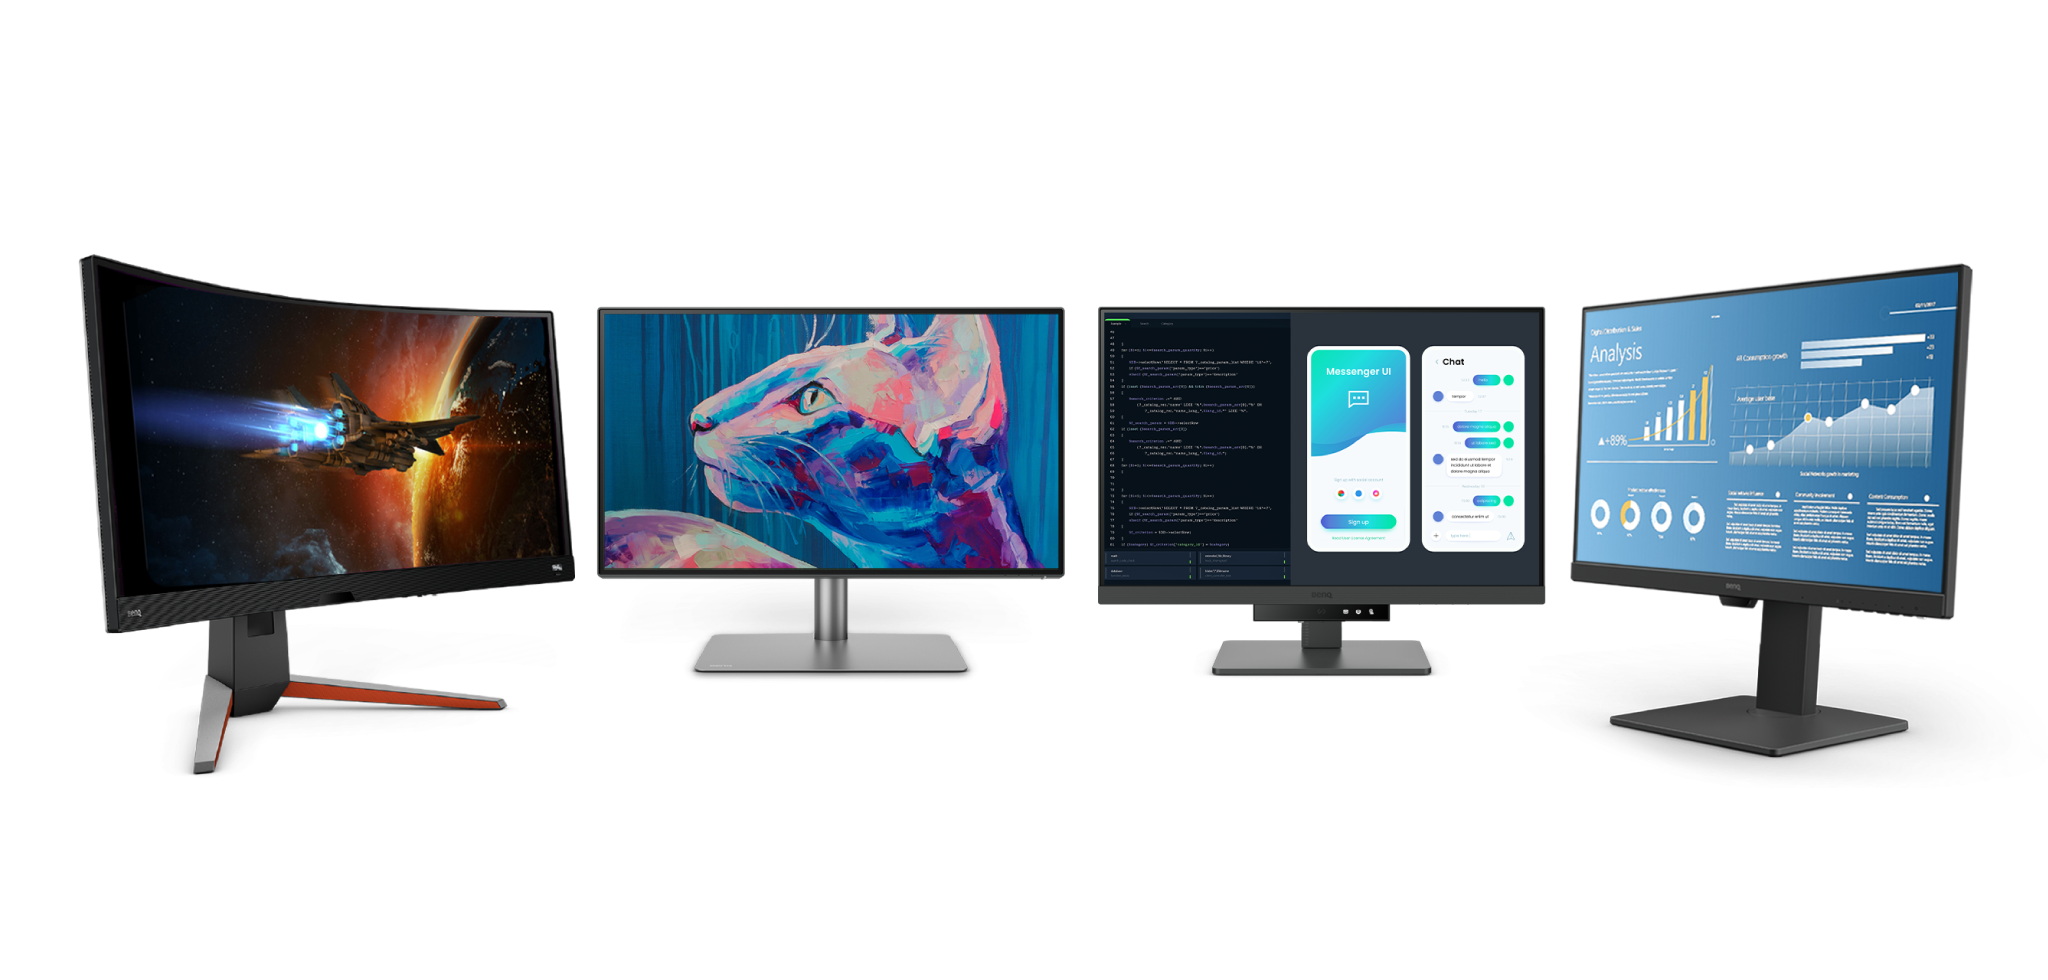 benq all monitors fitting perfectly for all spaces, uses, and needs.